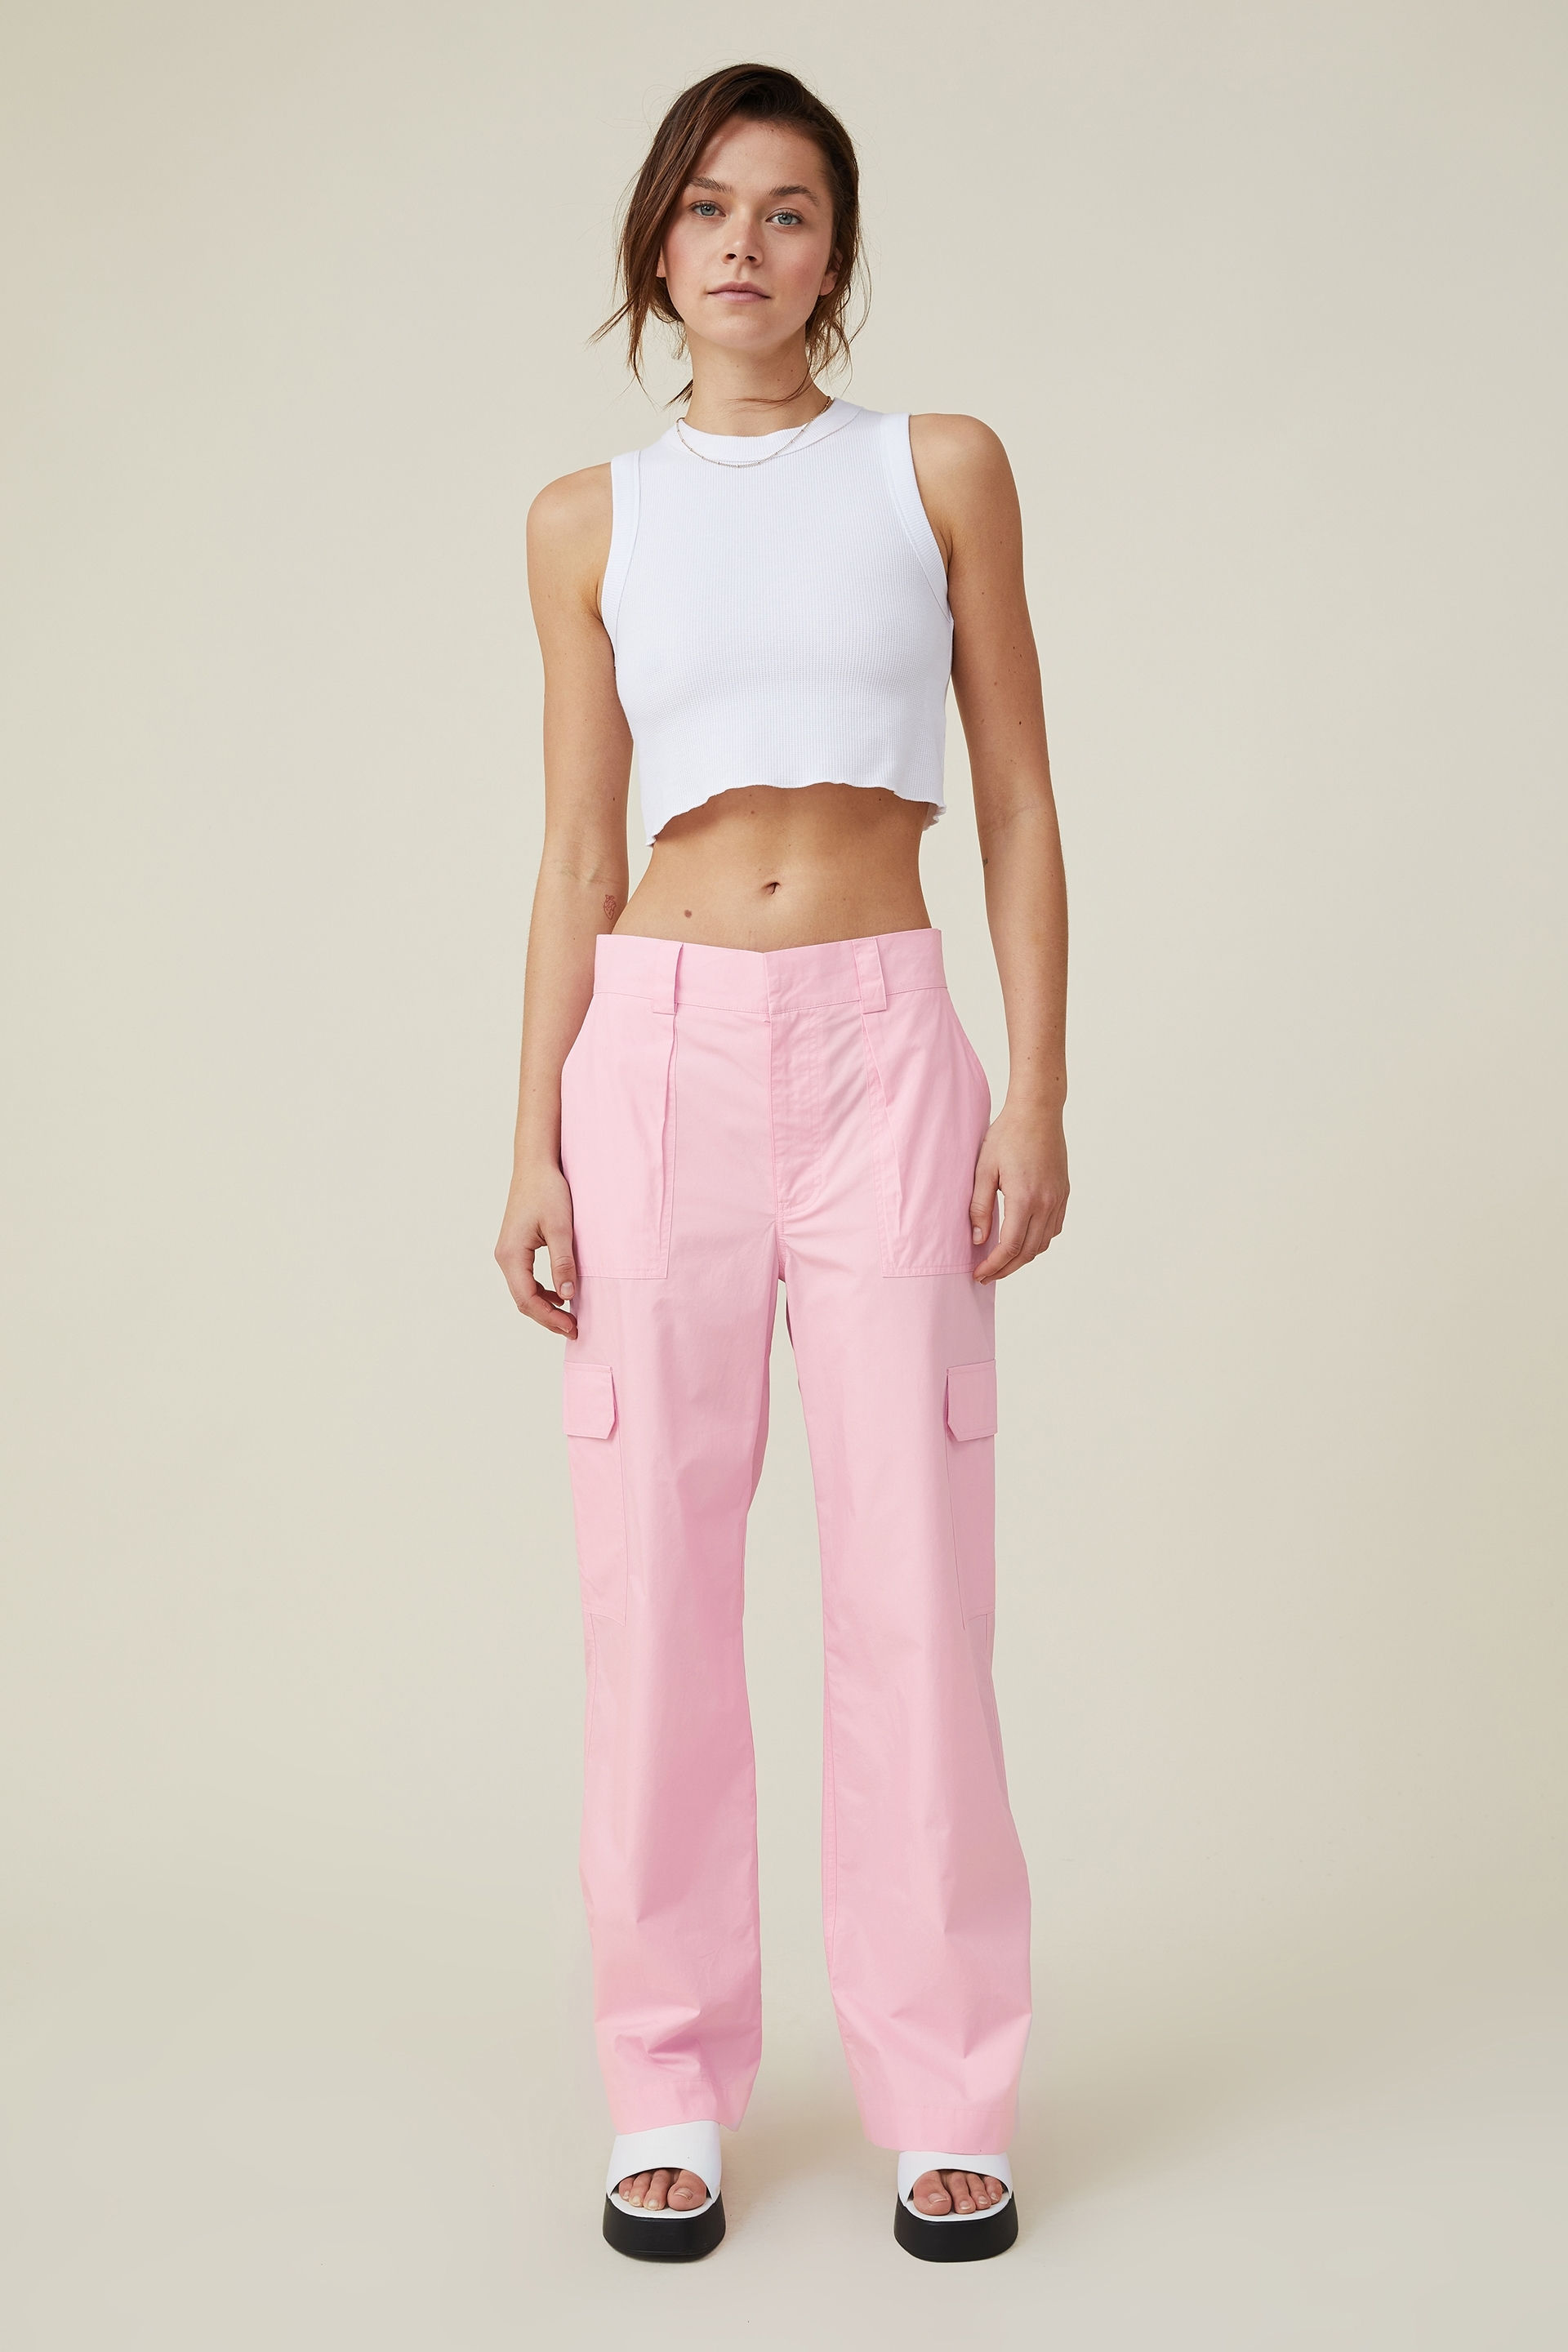 ASOS DESIGN tapered cargo pants in dusty pink | ASOS